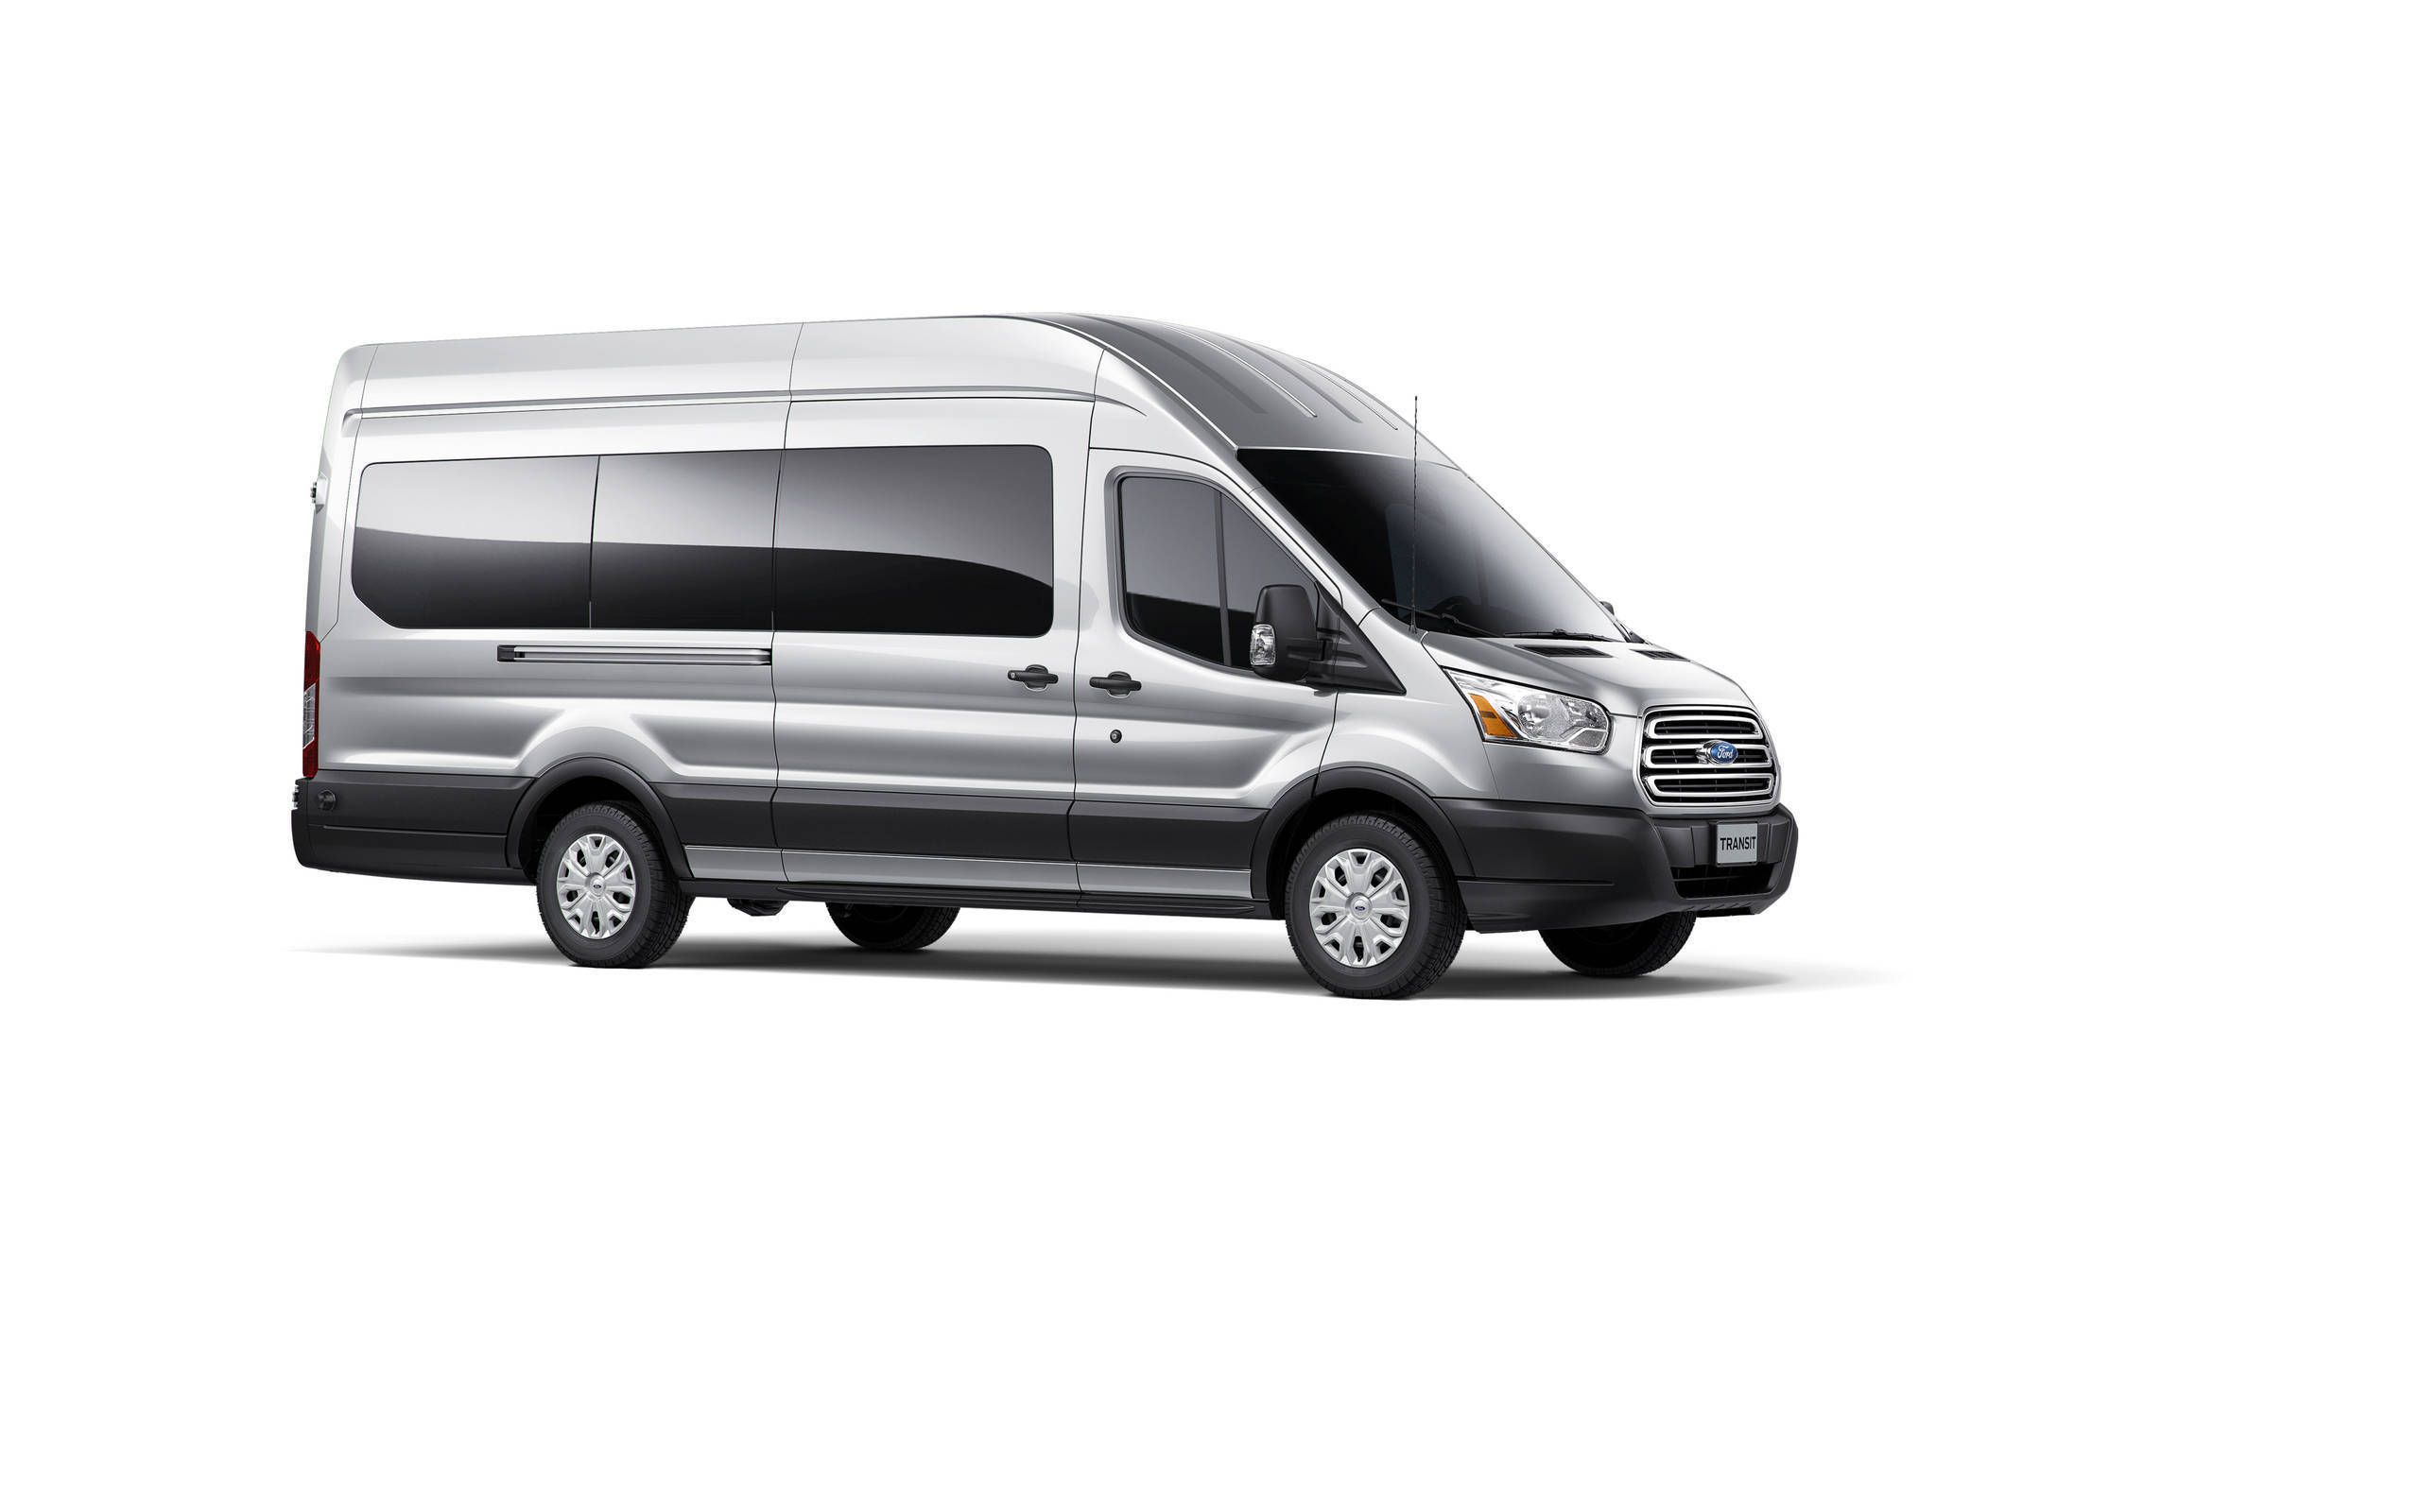 2015 Ford Transit 350 XLT Wagon High Roof review notes